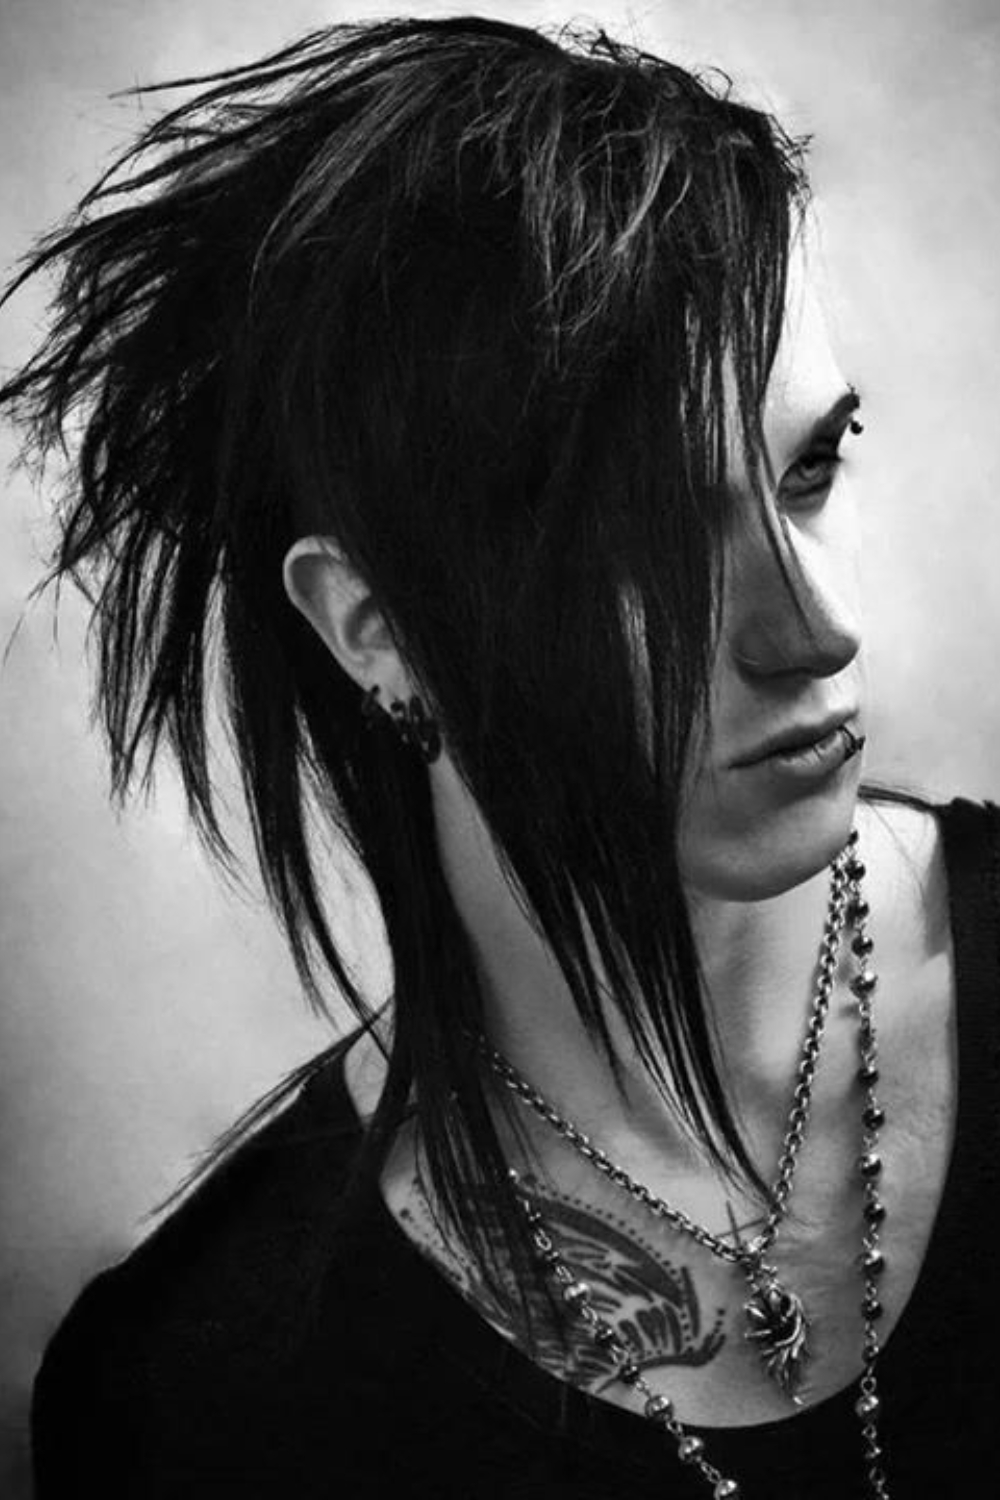 Goth Hairstyle For Men To Show Their Edgy Style